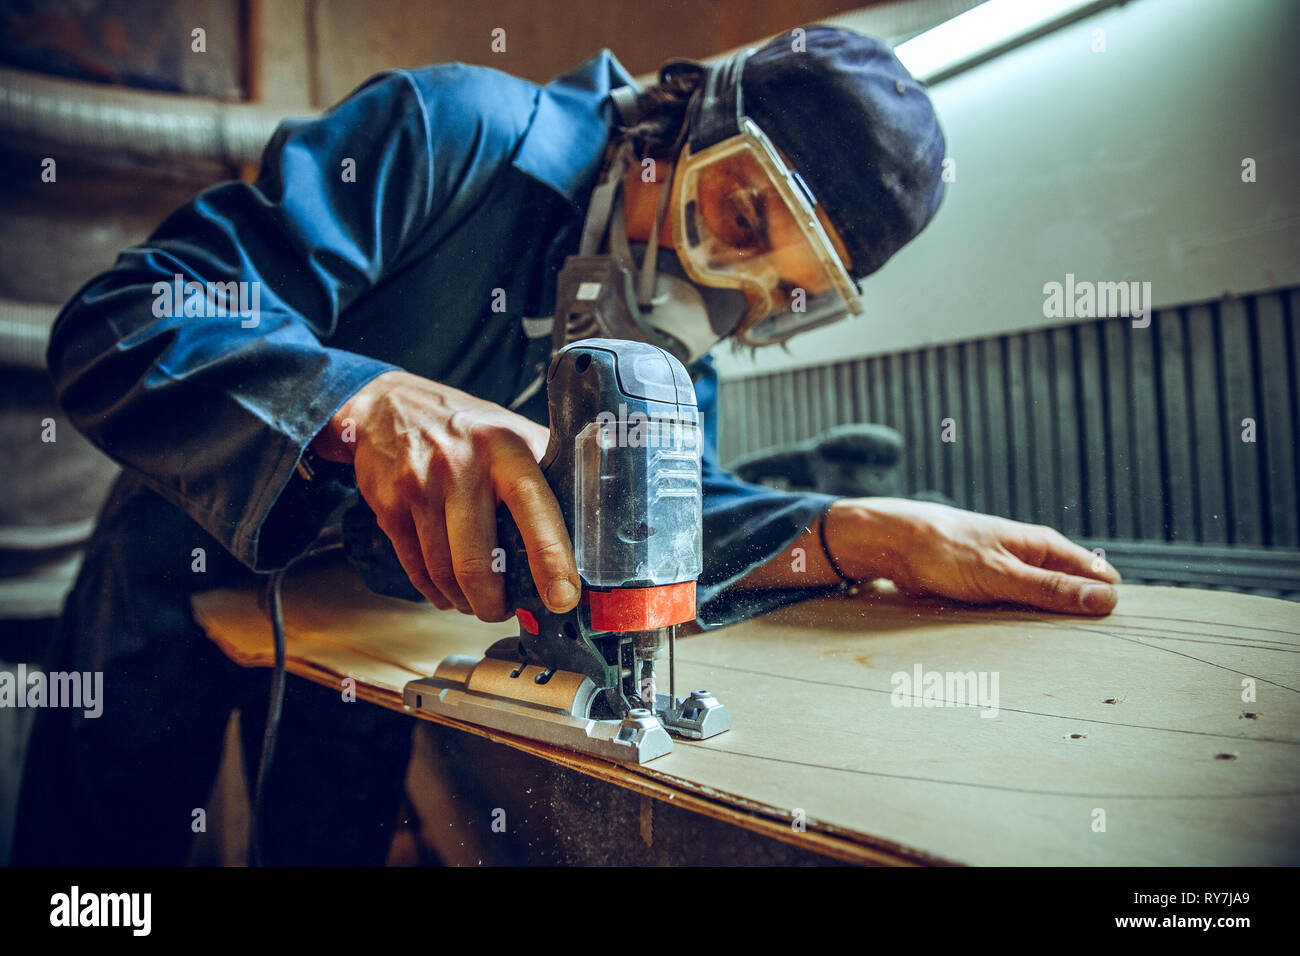 Carpenter using circular saw for cutting wooden boards. Construction details of male worker or handy man with power tools Stock Photo